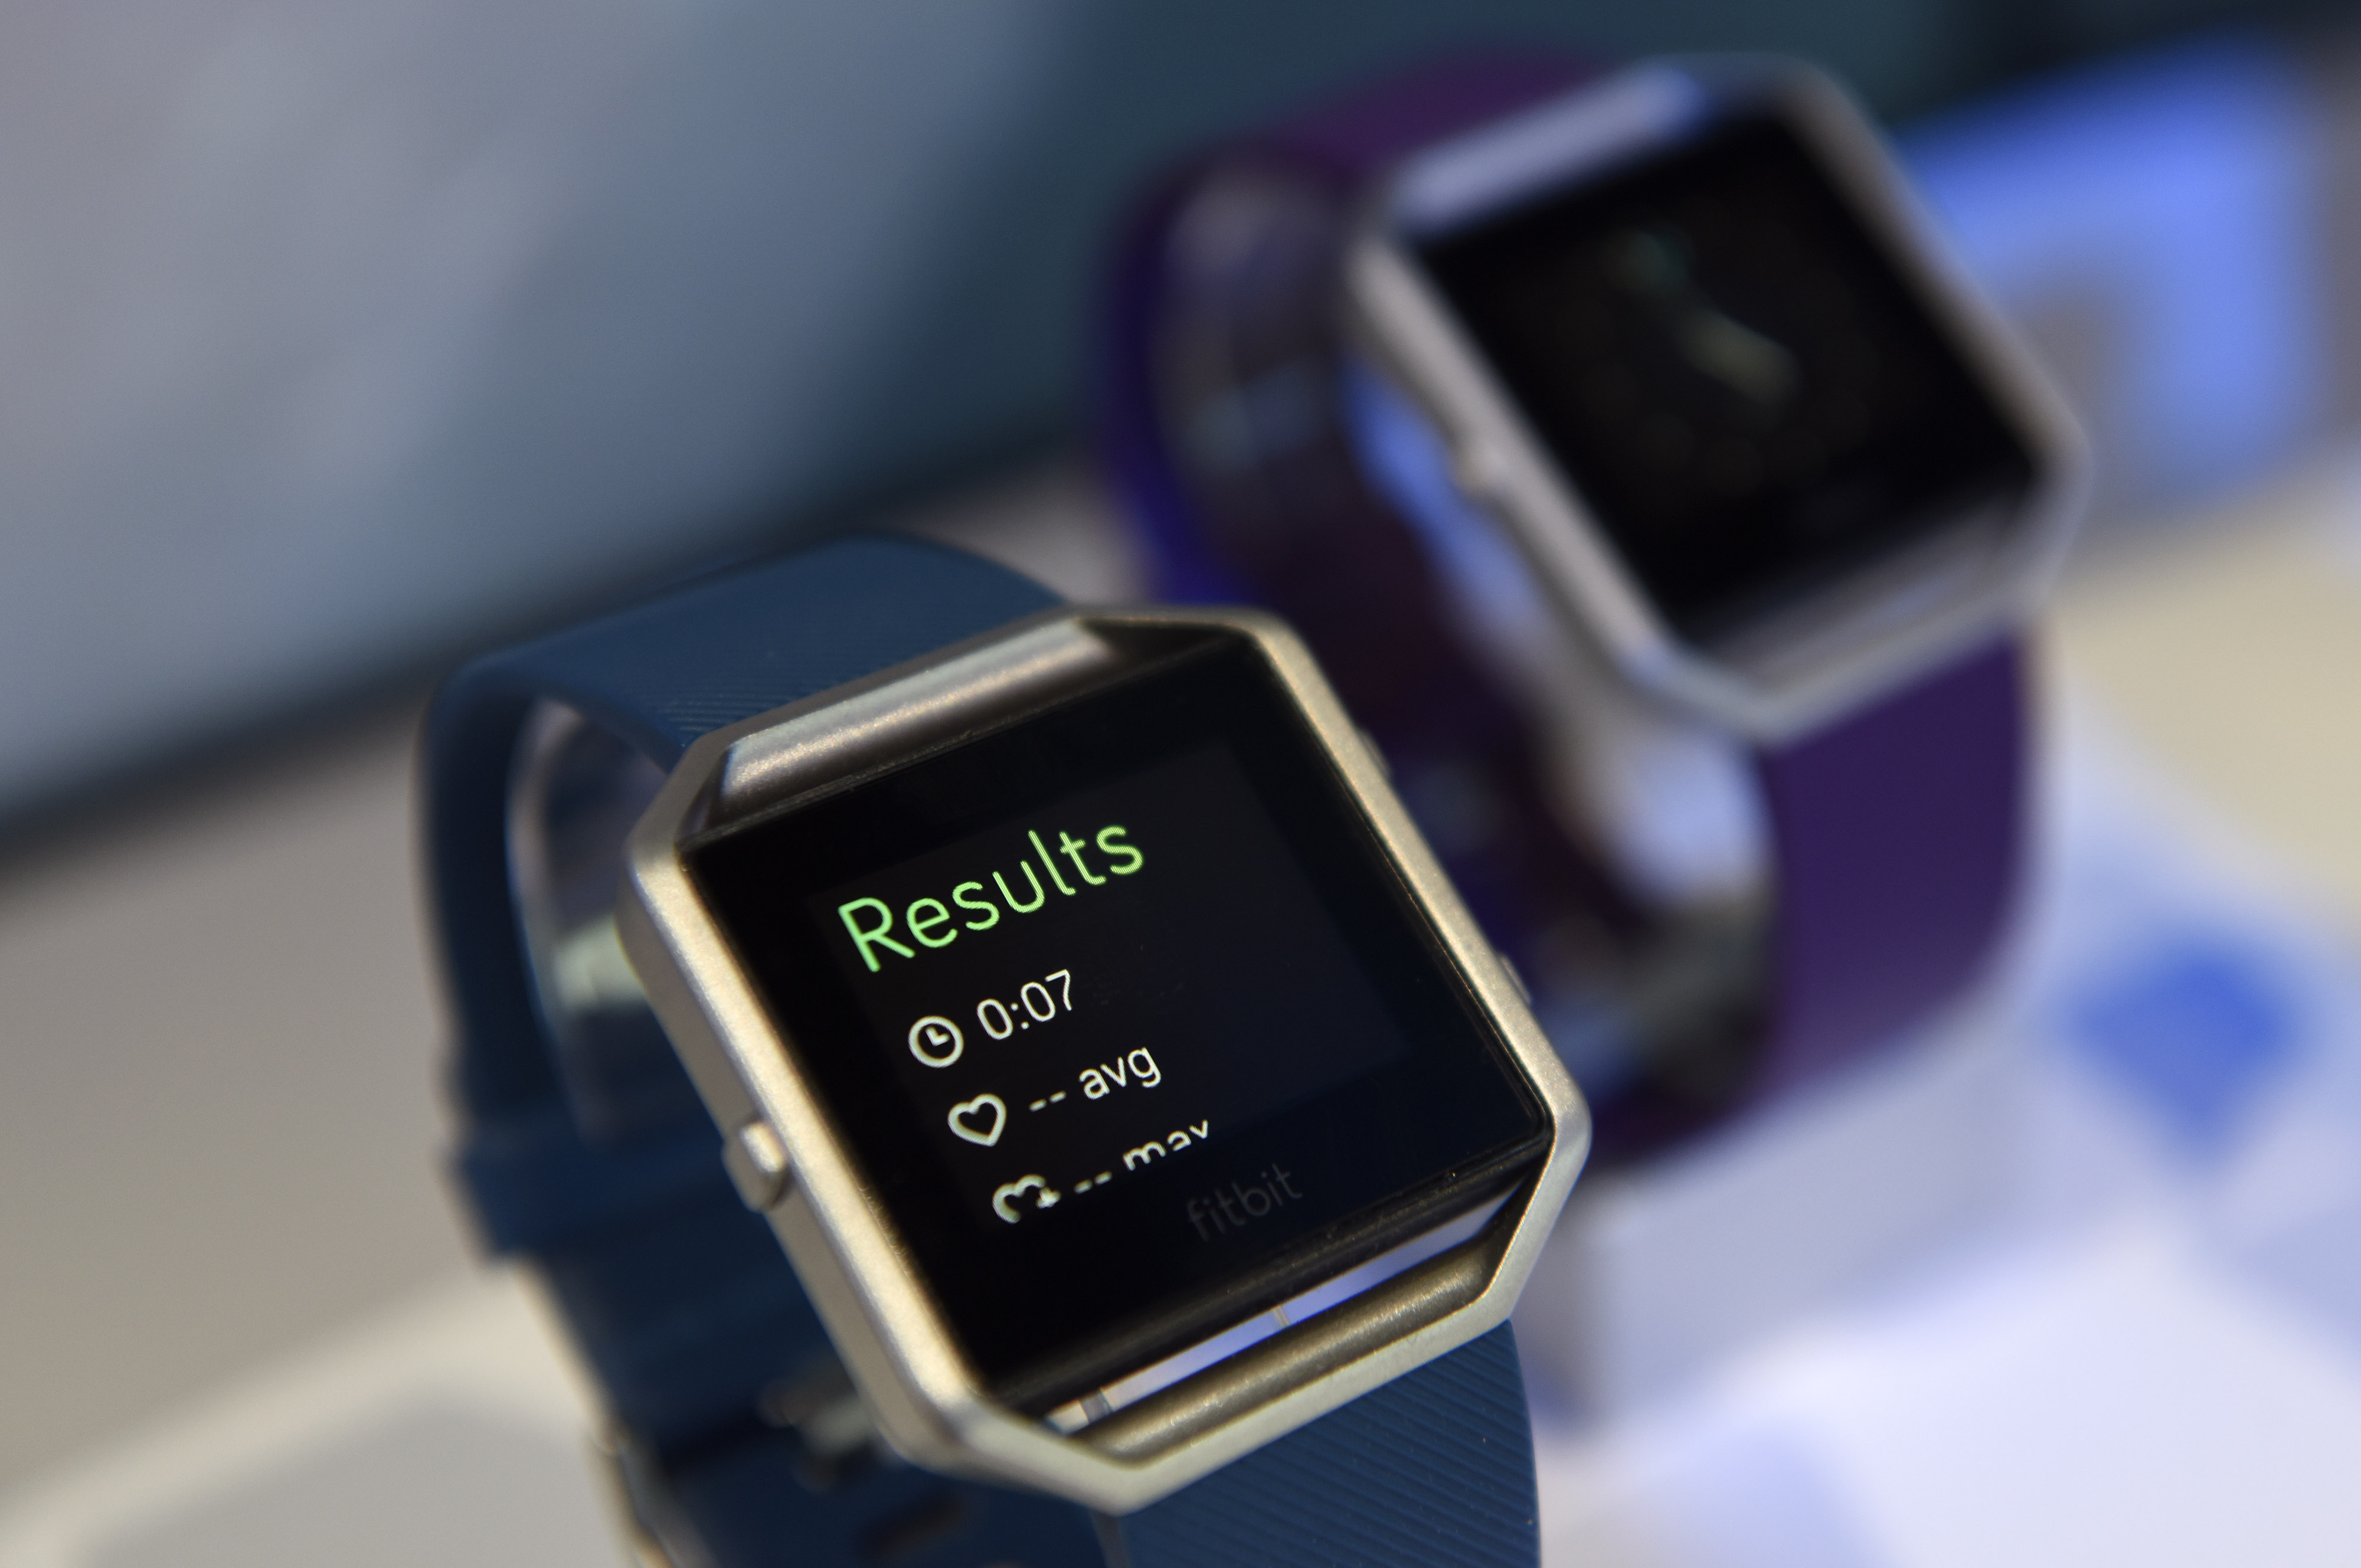 The Fitbit Inc. Blaze fitness tracker is displayed during the 2016 Consumer Electronics Show (CES) in Las Vegas, Nevada, U.S., on Friday, Jan. 8, 2016.